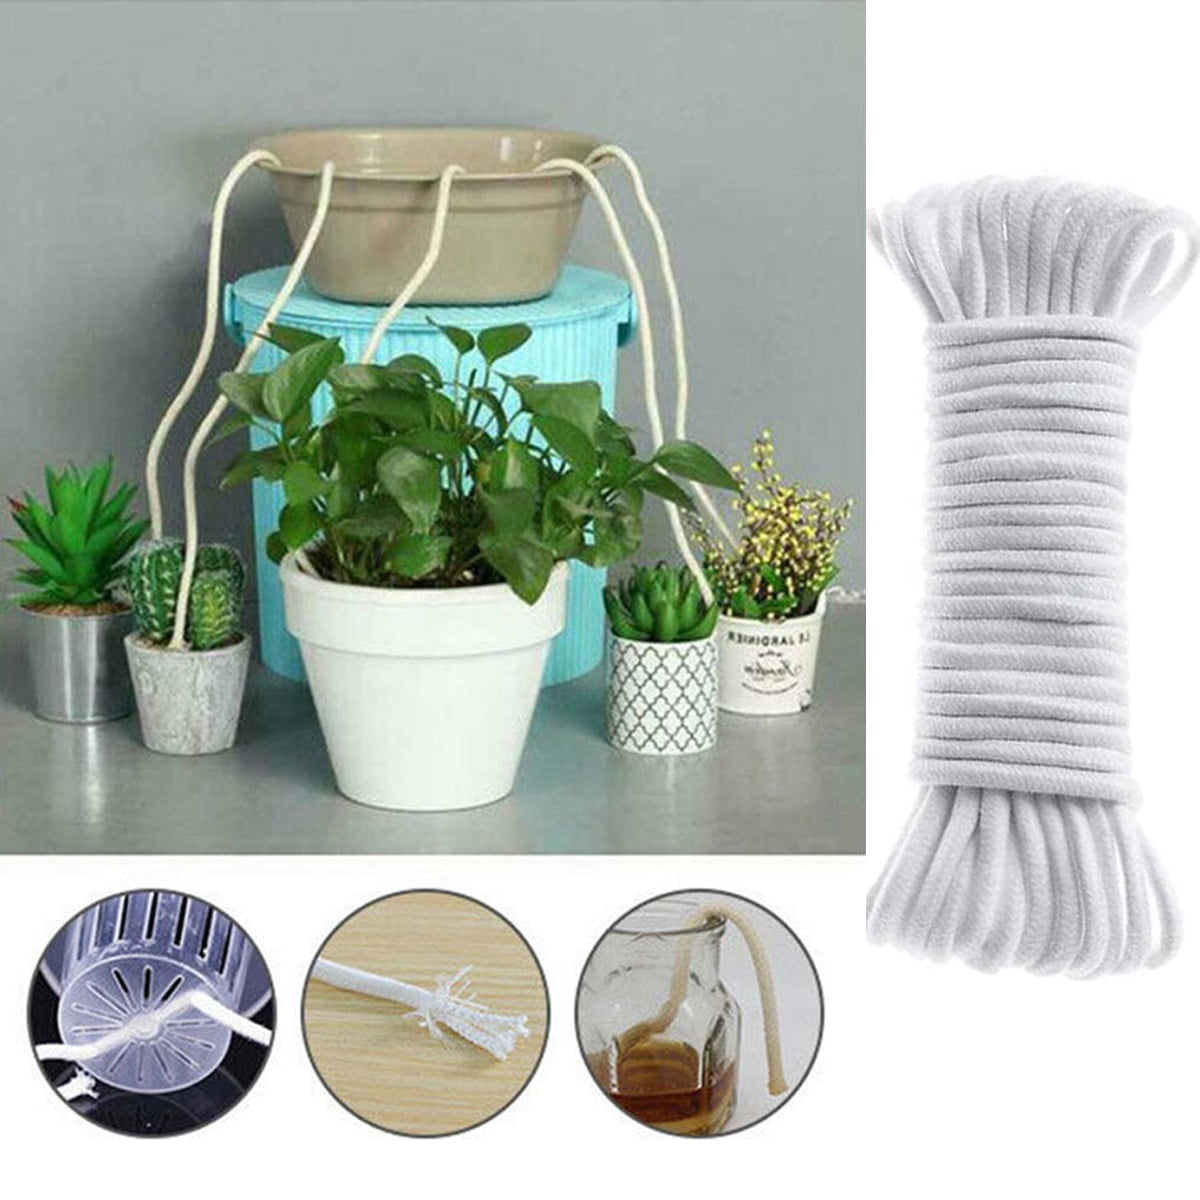 Details about  / DIY Self Watering Wicking Cord Plant Bonsai Hydroponic Automatic Irrigate Rope